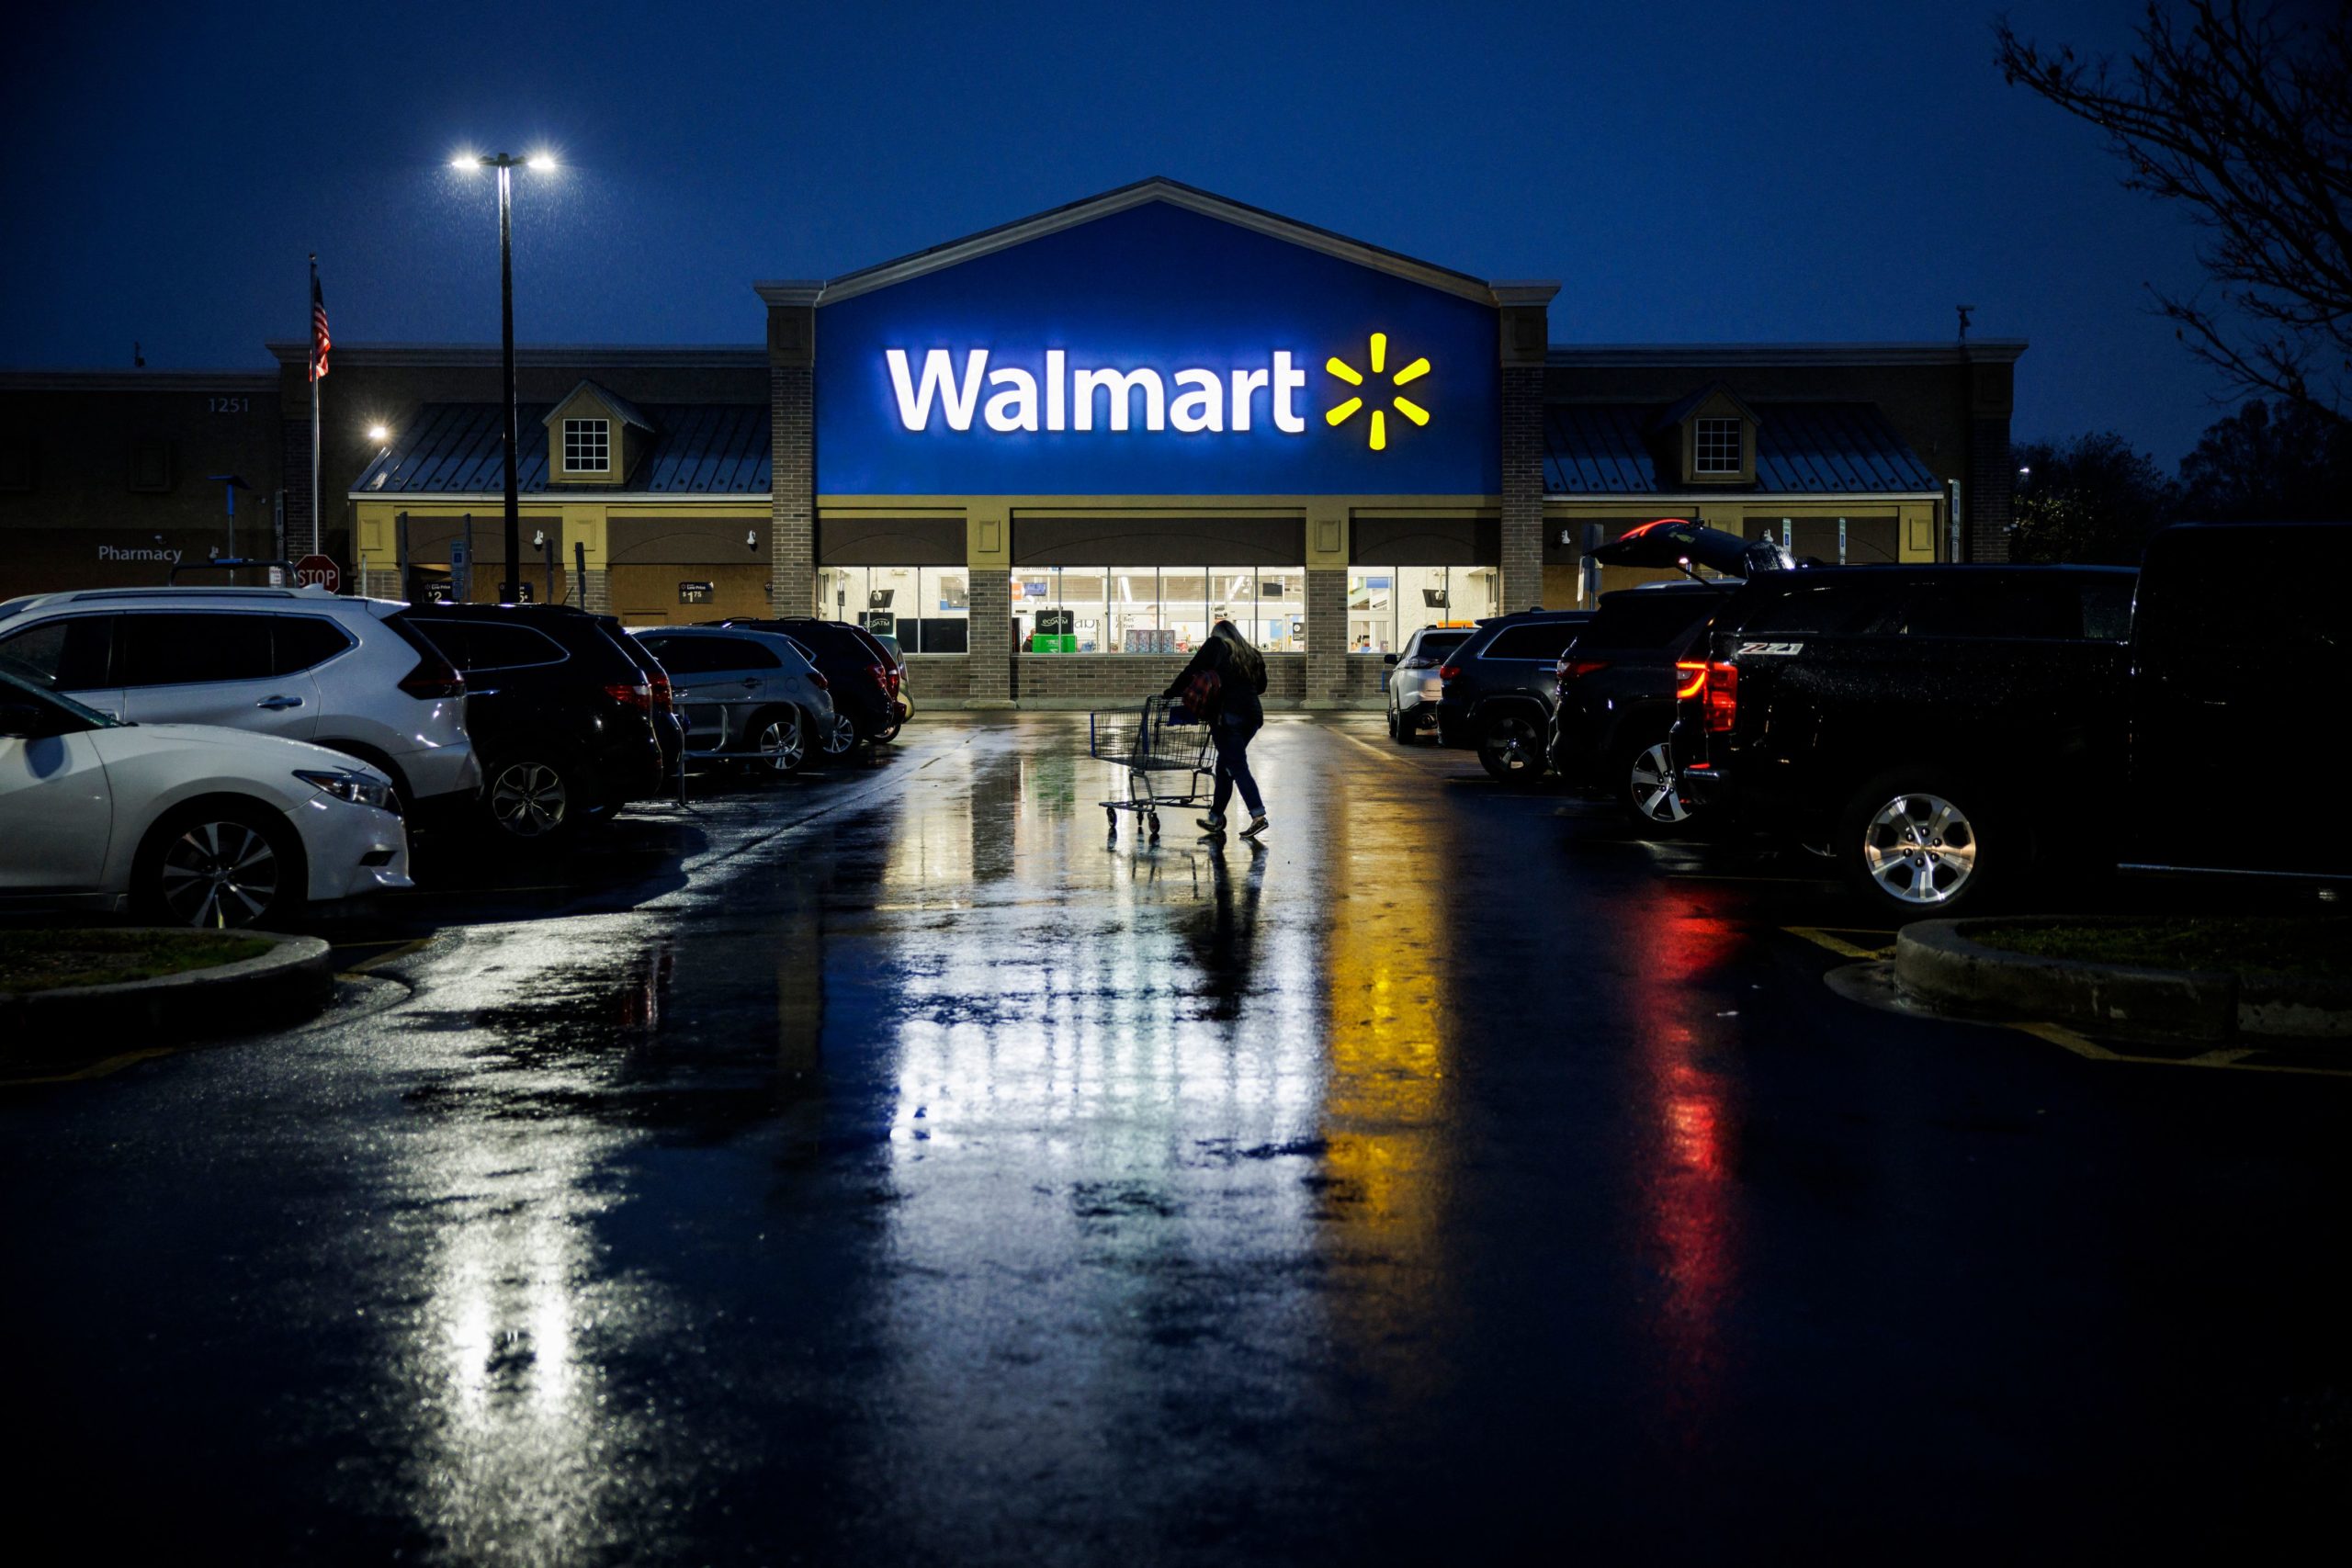 A shopper pushes a cart through the parking lot of a Walmart on the morning of Black Friday in Wilmington, Delaware, on November 25, 2022. - With inflation on the rise, retailers are expecting that many shoppers will be looking for especially good deals as discretionary spending falls. (Photo by Samuel Corum / AFP) (Photo by SAMUEL CORUM/AFP via Getty Images)